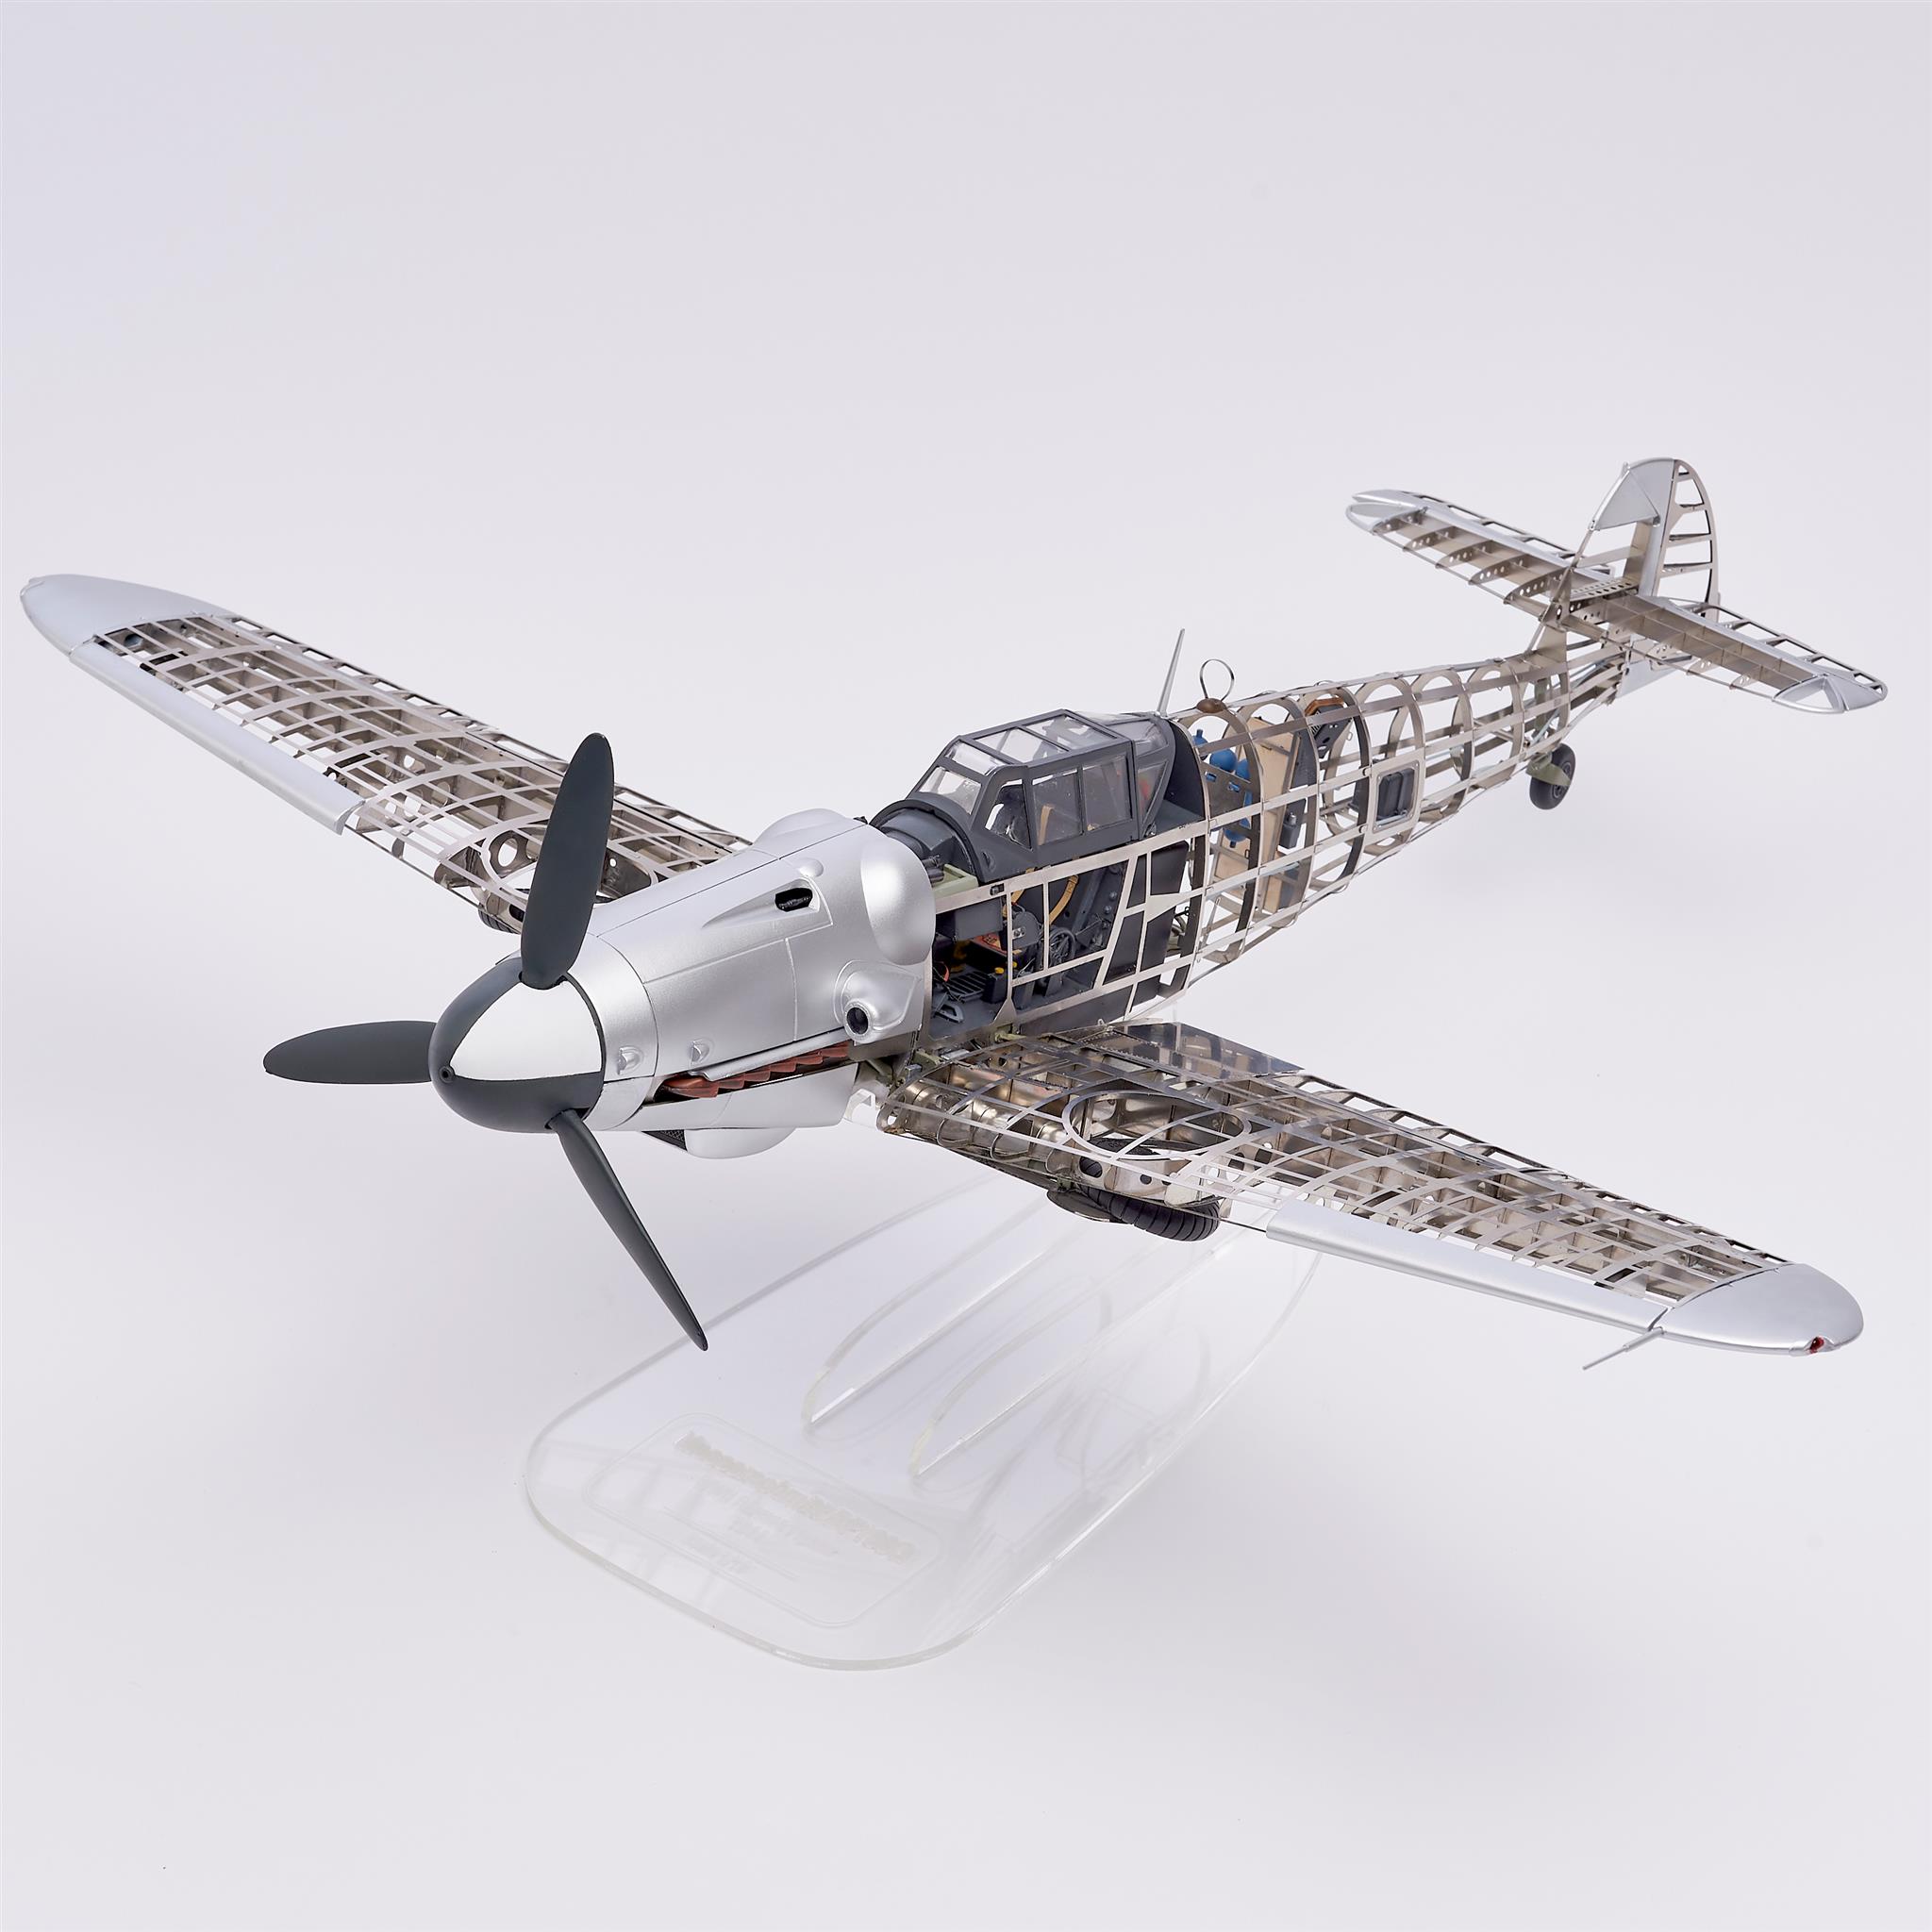 Build this great German plane 1/16 scale.